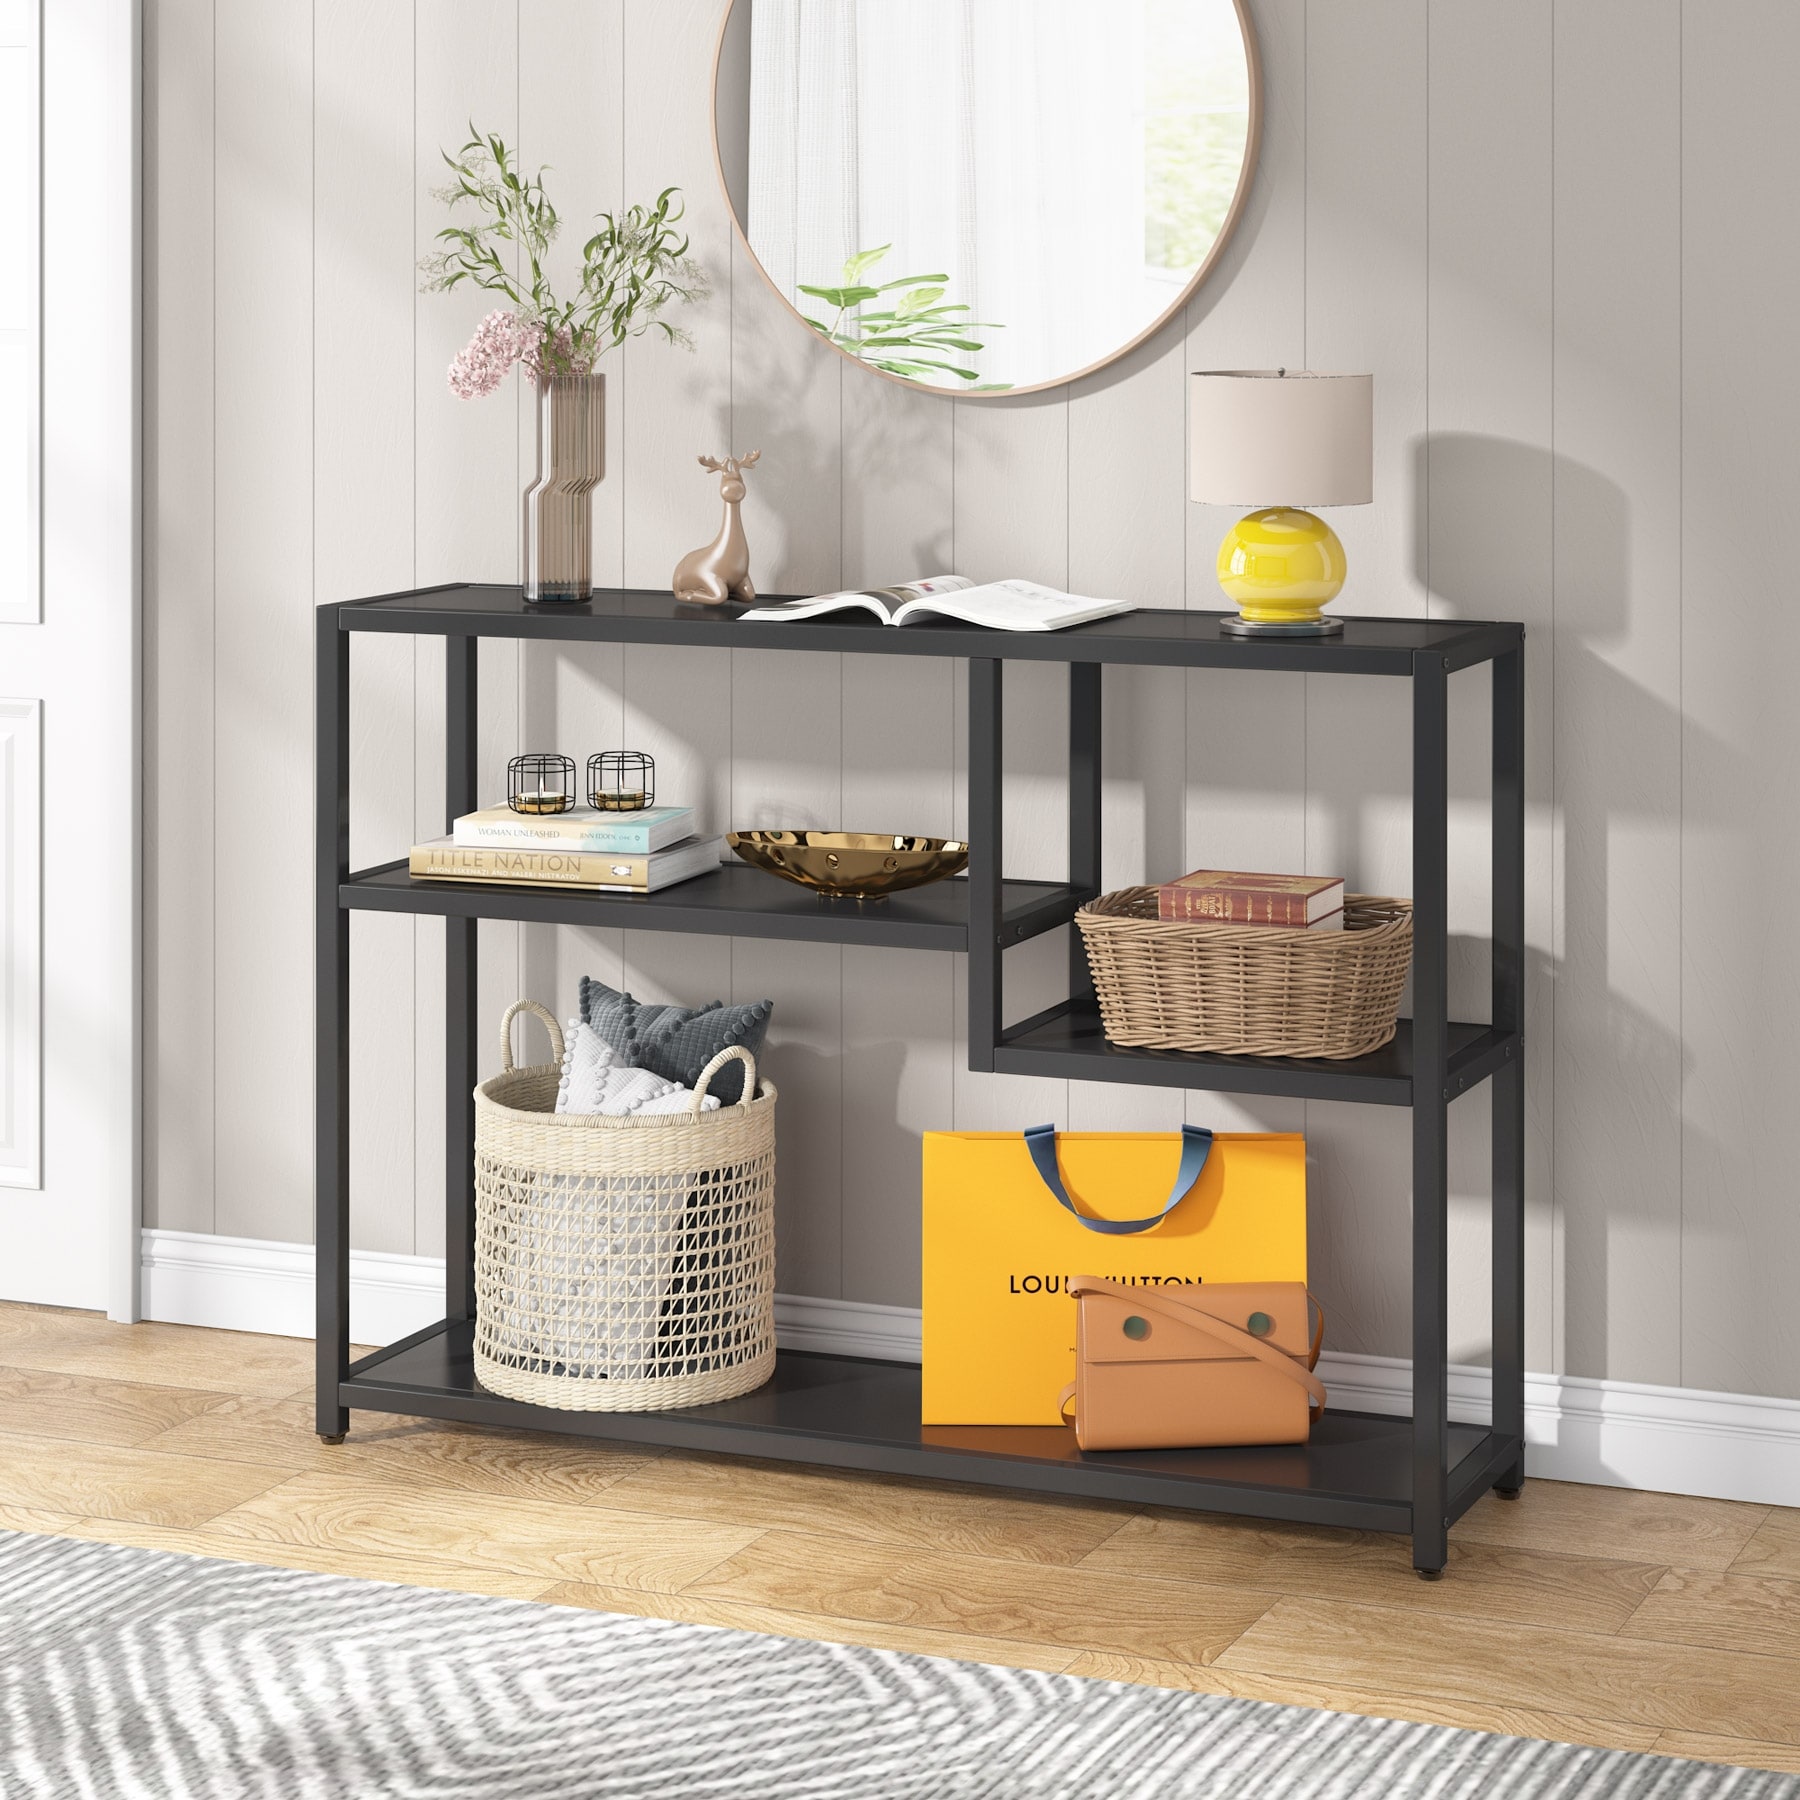 https://ak1.ostkcdn.com/images/products/is/images/direct/a9bb0c83ad4c56edef0713922b5f2bfe2c243129/43-Inch-Console-Table%2CSmall-Black-Entryway-Table-with-Storage-Shelves%2CEntrance-Table-Behind-Couch-Table.jpg